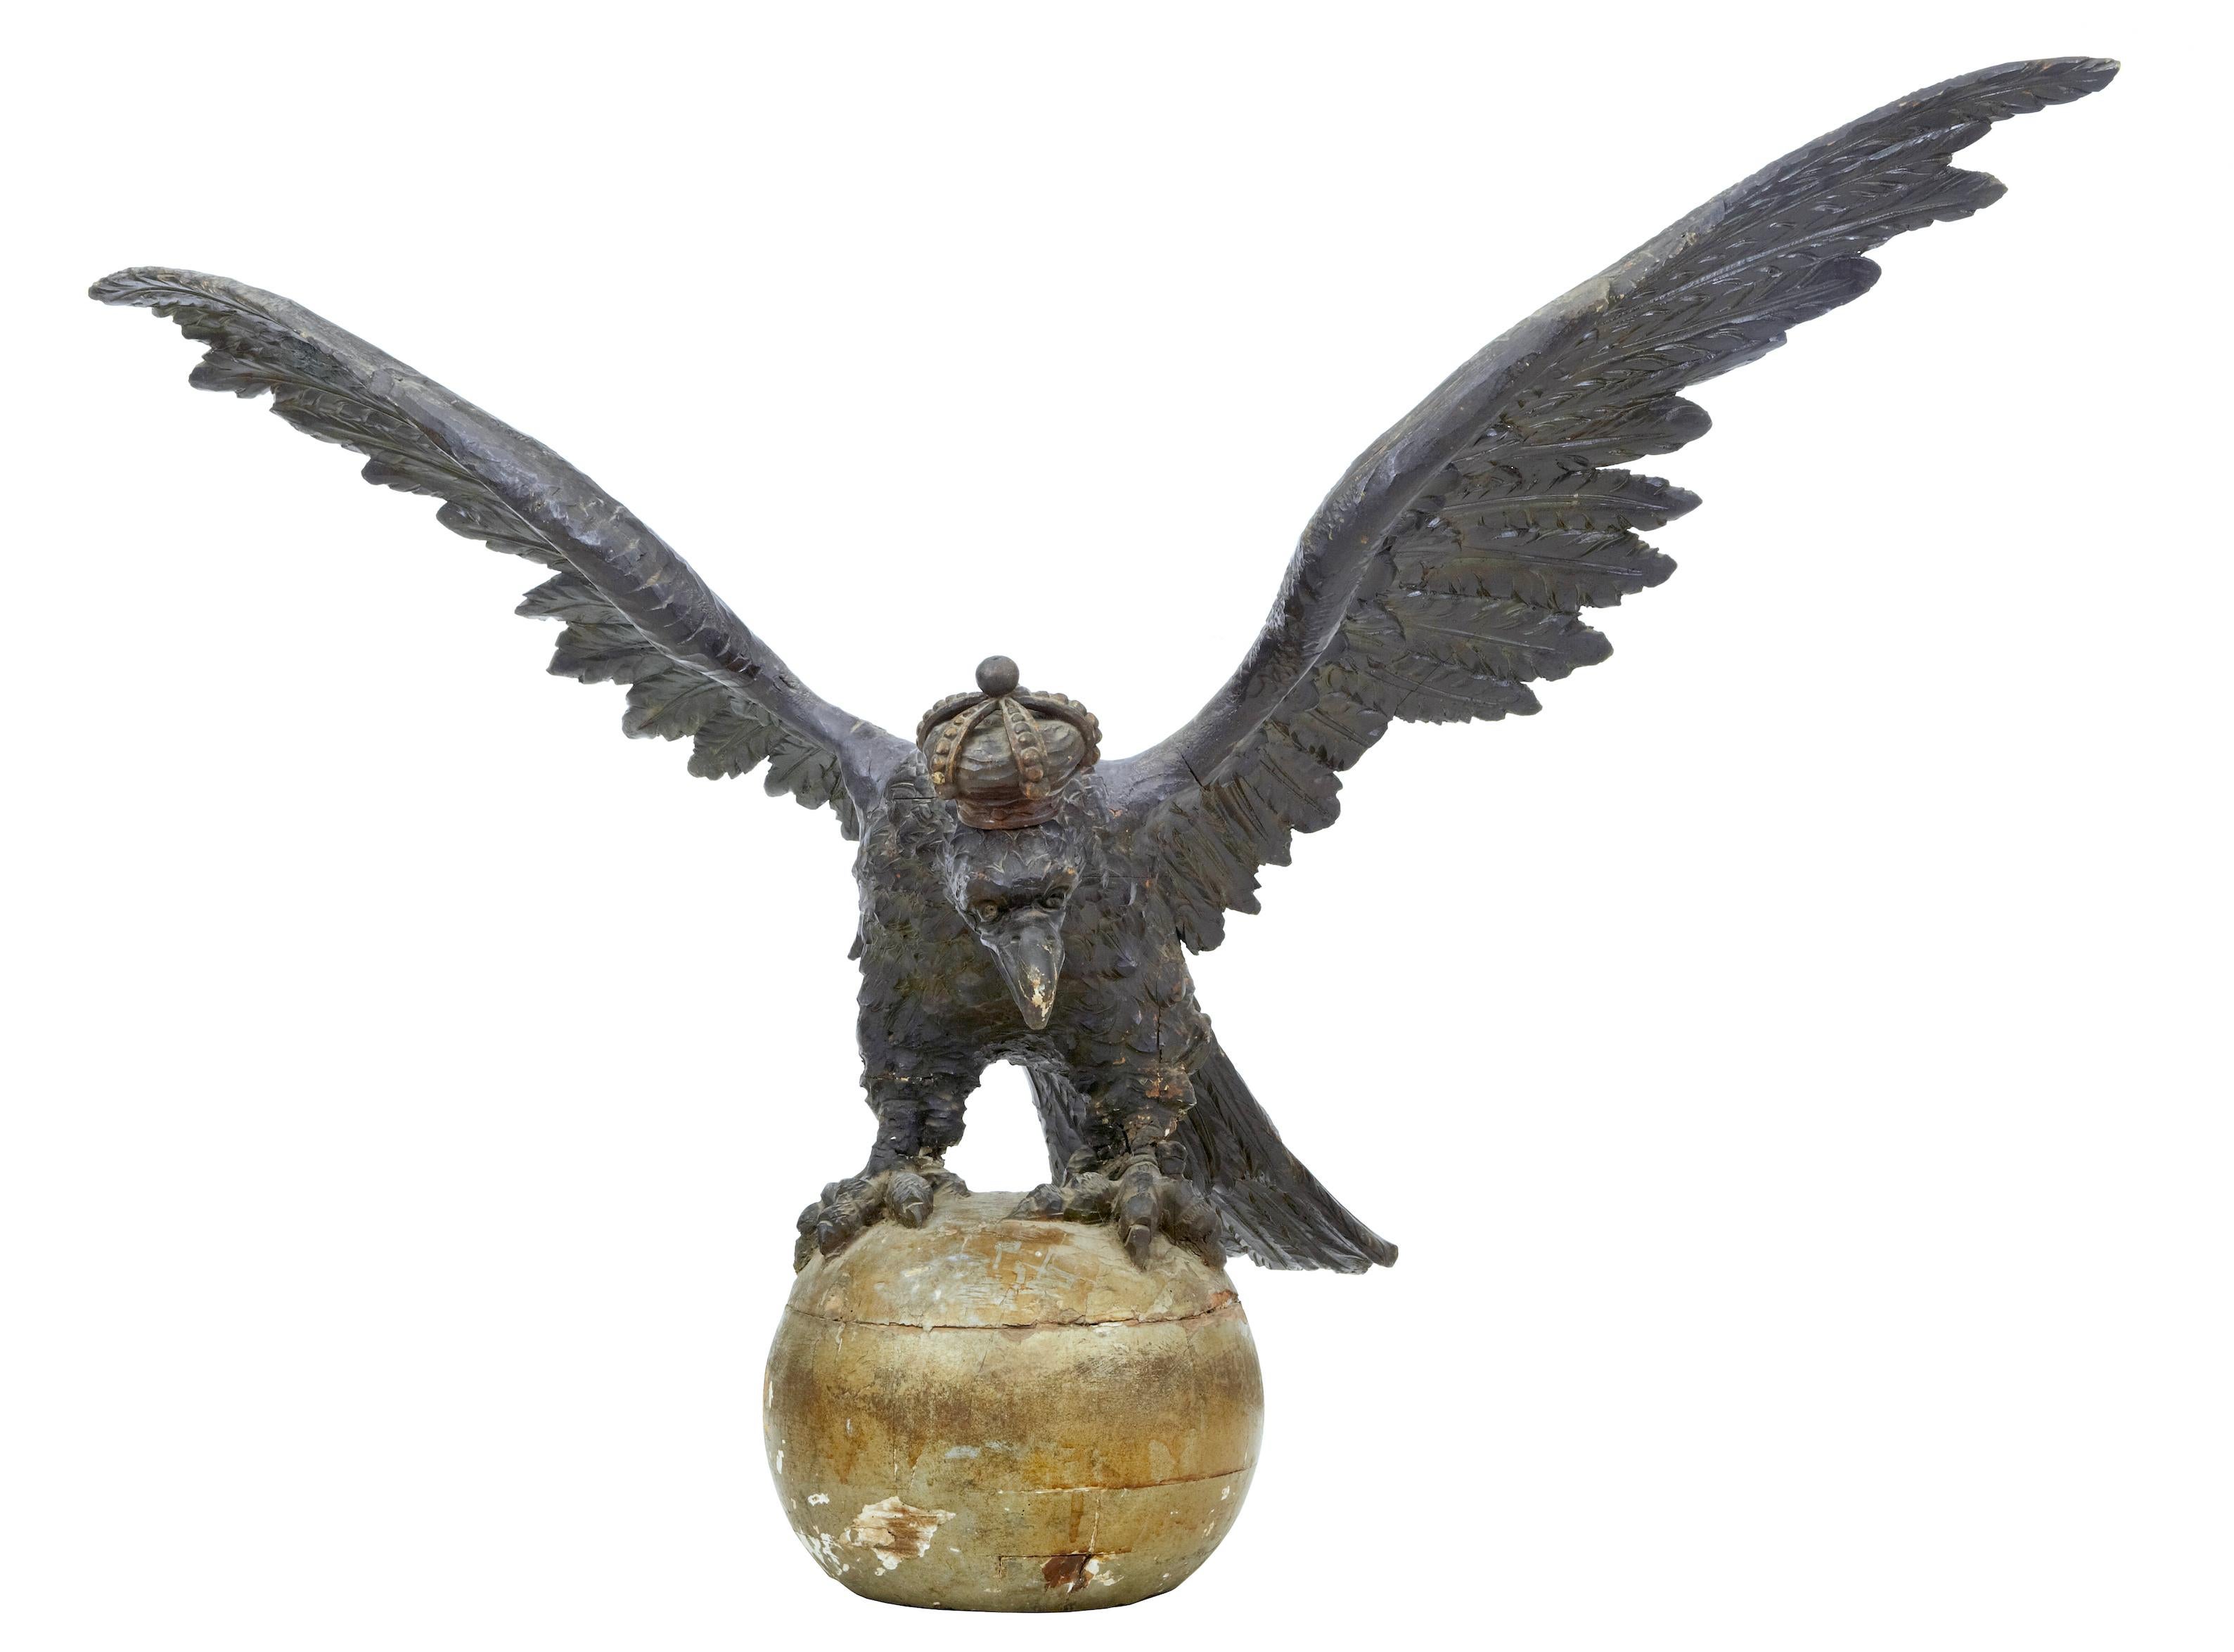 Rare early 19th century carved Hapsburg decorative eagle, circa 1820.

Stunning carved German Hapsburg eagle standing on giltwood ball. Profusely carved in linden wood and in near original condition. Eagle posing in a menacing position with a